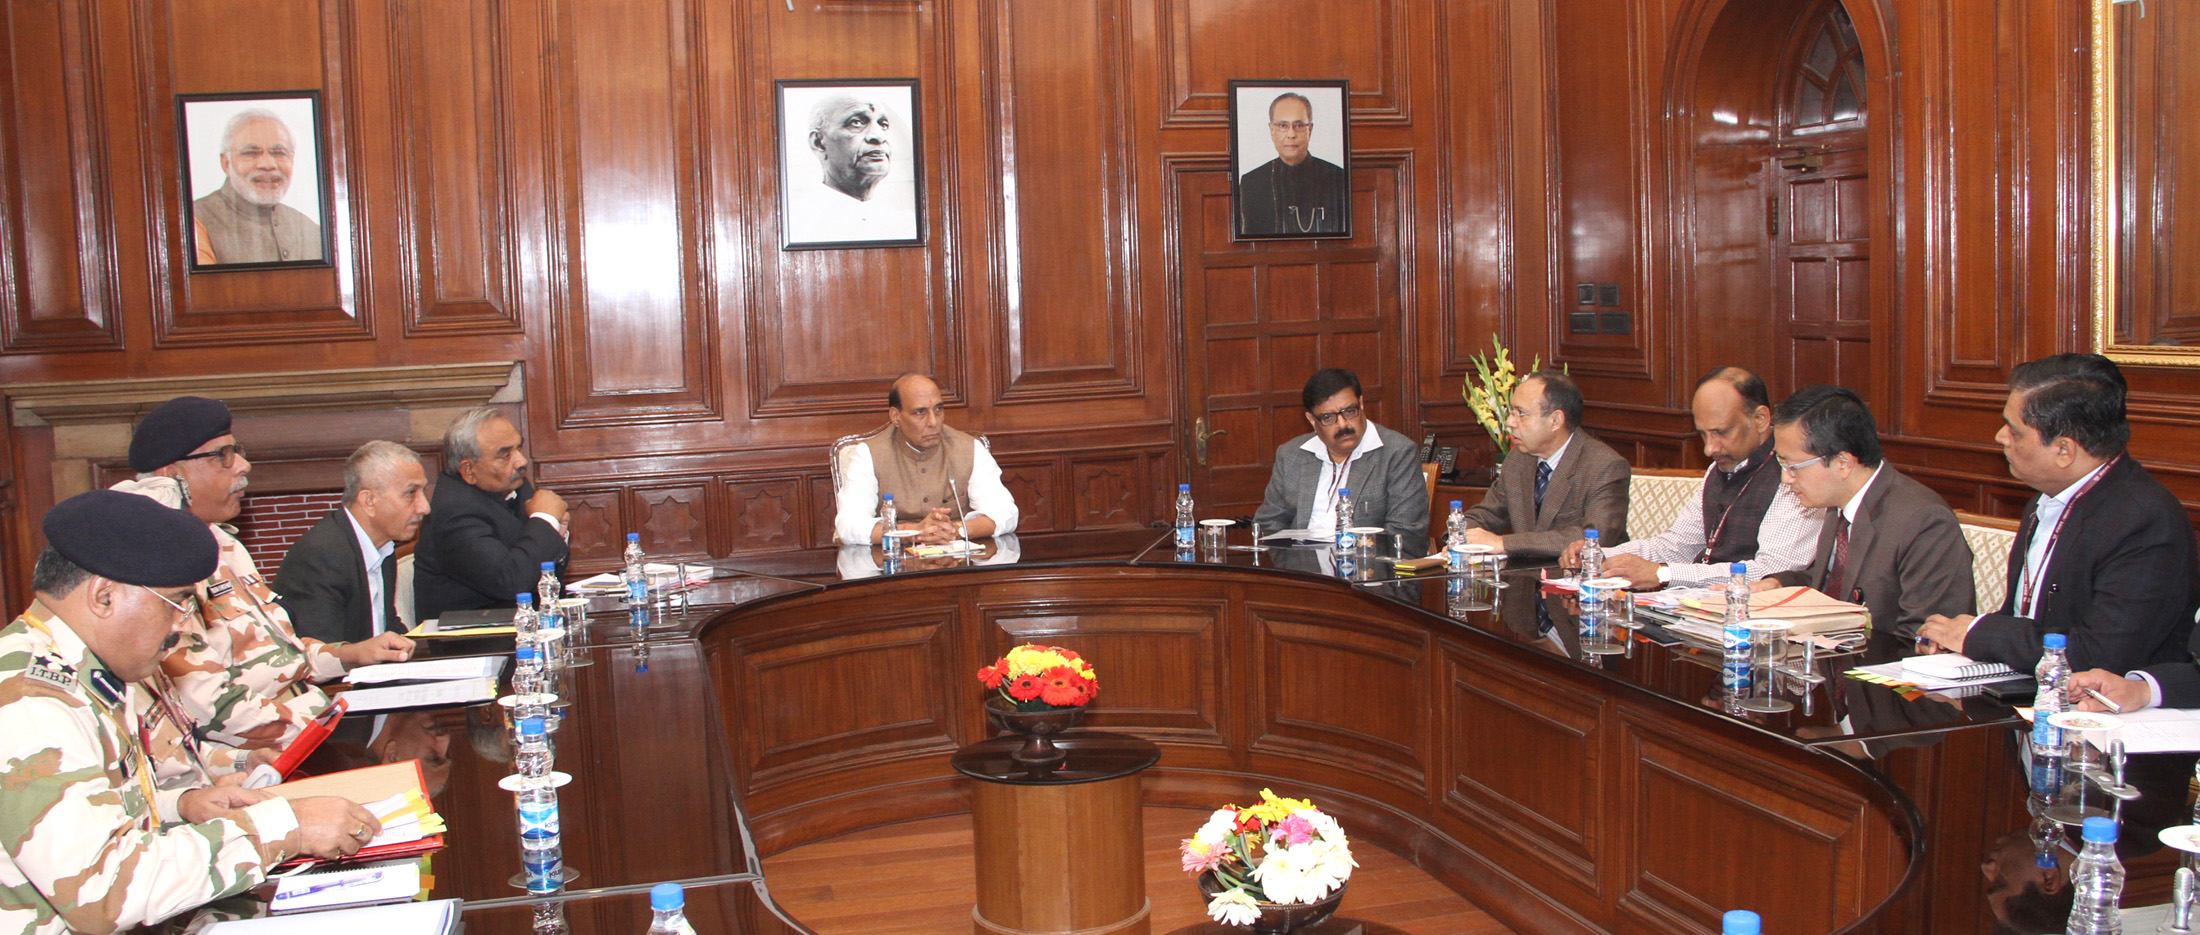 The Union Home Minister, Shri Rajnath Singh reviews the functioning of Central Armed Police Forces (CAPFs), during a meeting, in New Delhi on January 14, 2016.  The Union Home Secretary, Shri Rajiv Mehrishi, the Secretary (Border Management), Shri Anoop Kumar Srivastava and other senior officers of MHA and CAPFs are also seen.